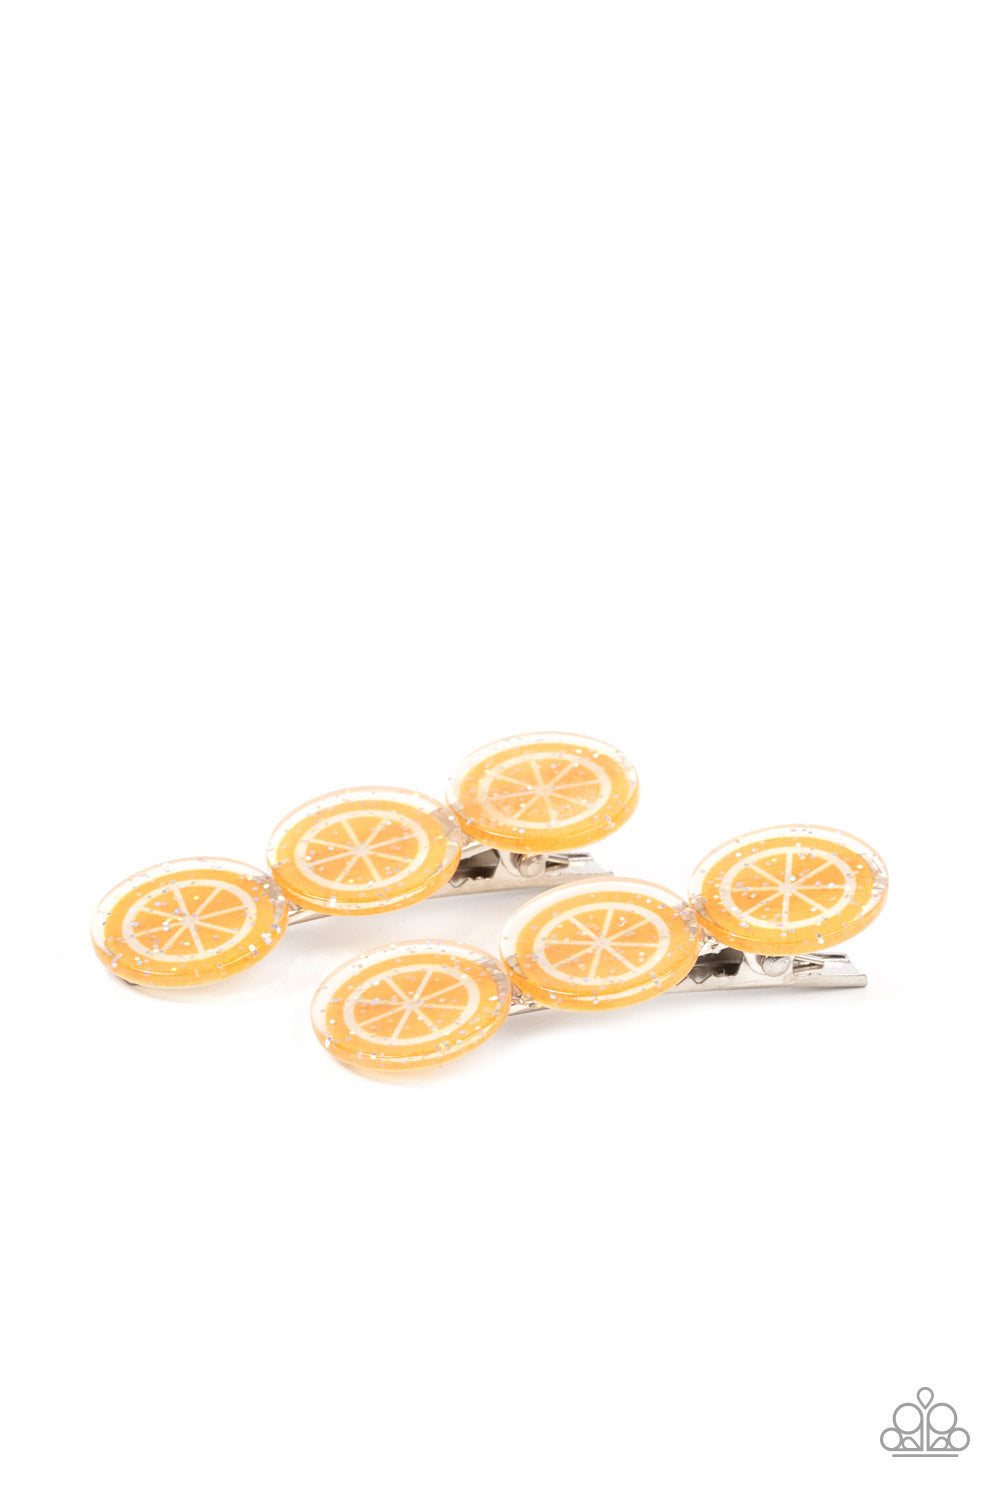 Charismatically Citrus Orange Hair Clip - Paparazzi Accessories  Sprinkled in sparkle, a zesty trio of orange frames coalesce into a citrusy pair of hair clips. Features standard hair clips on the back.  Sold as one pair of hair clips.